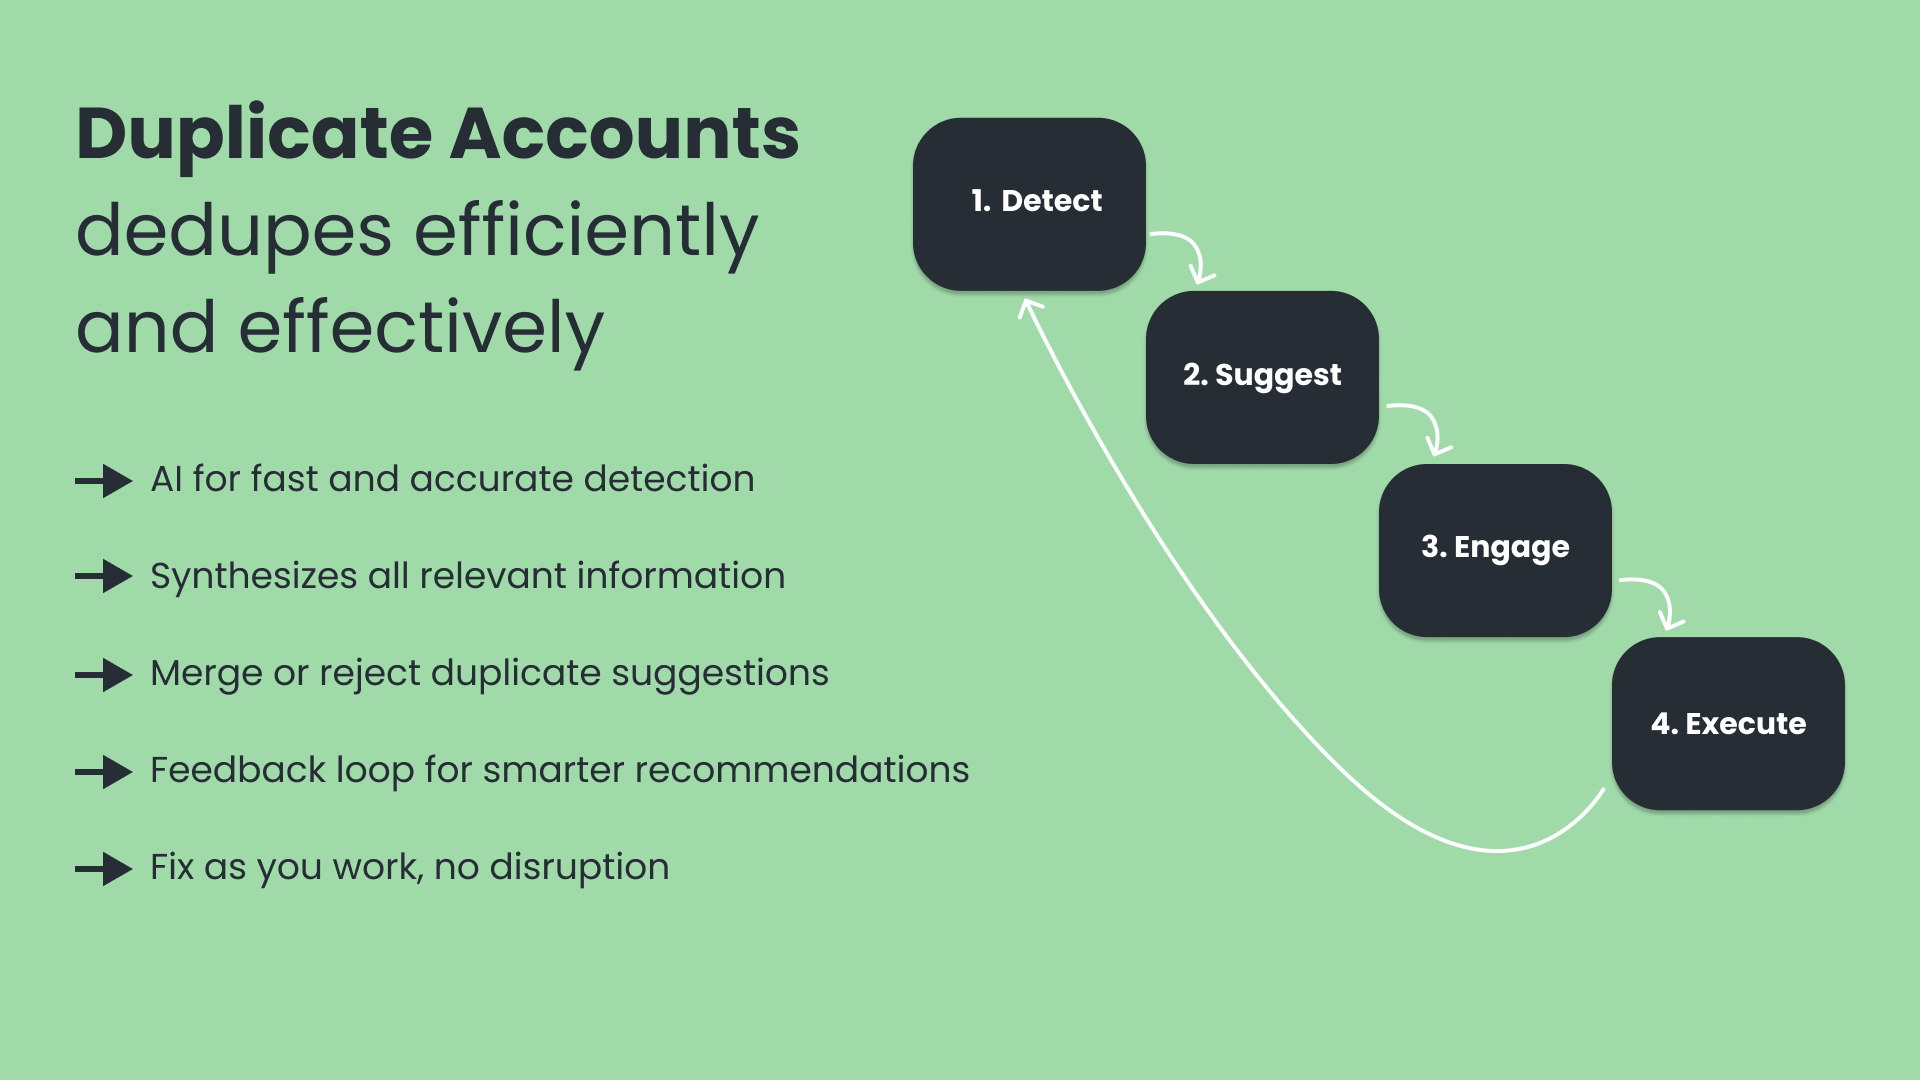 The Duplicate Accounts feature works by using AI for fast and accurate detection, synthesizes actionable insights, recommends merge or rejection solutions, collects feedback from user decision (feedback loop) and works in real-time for minimal disruption.